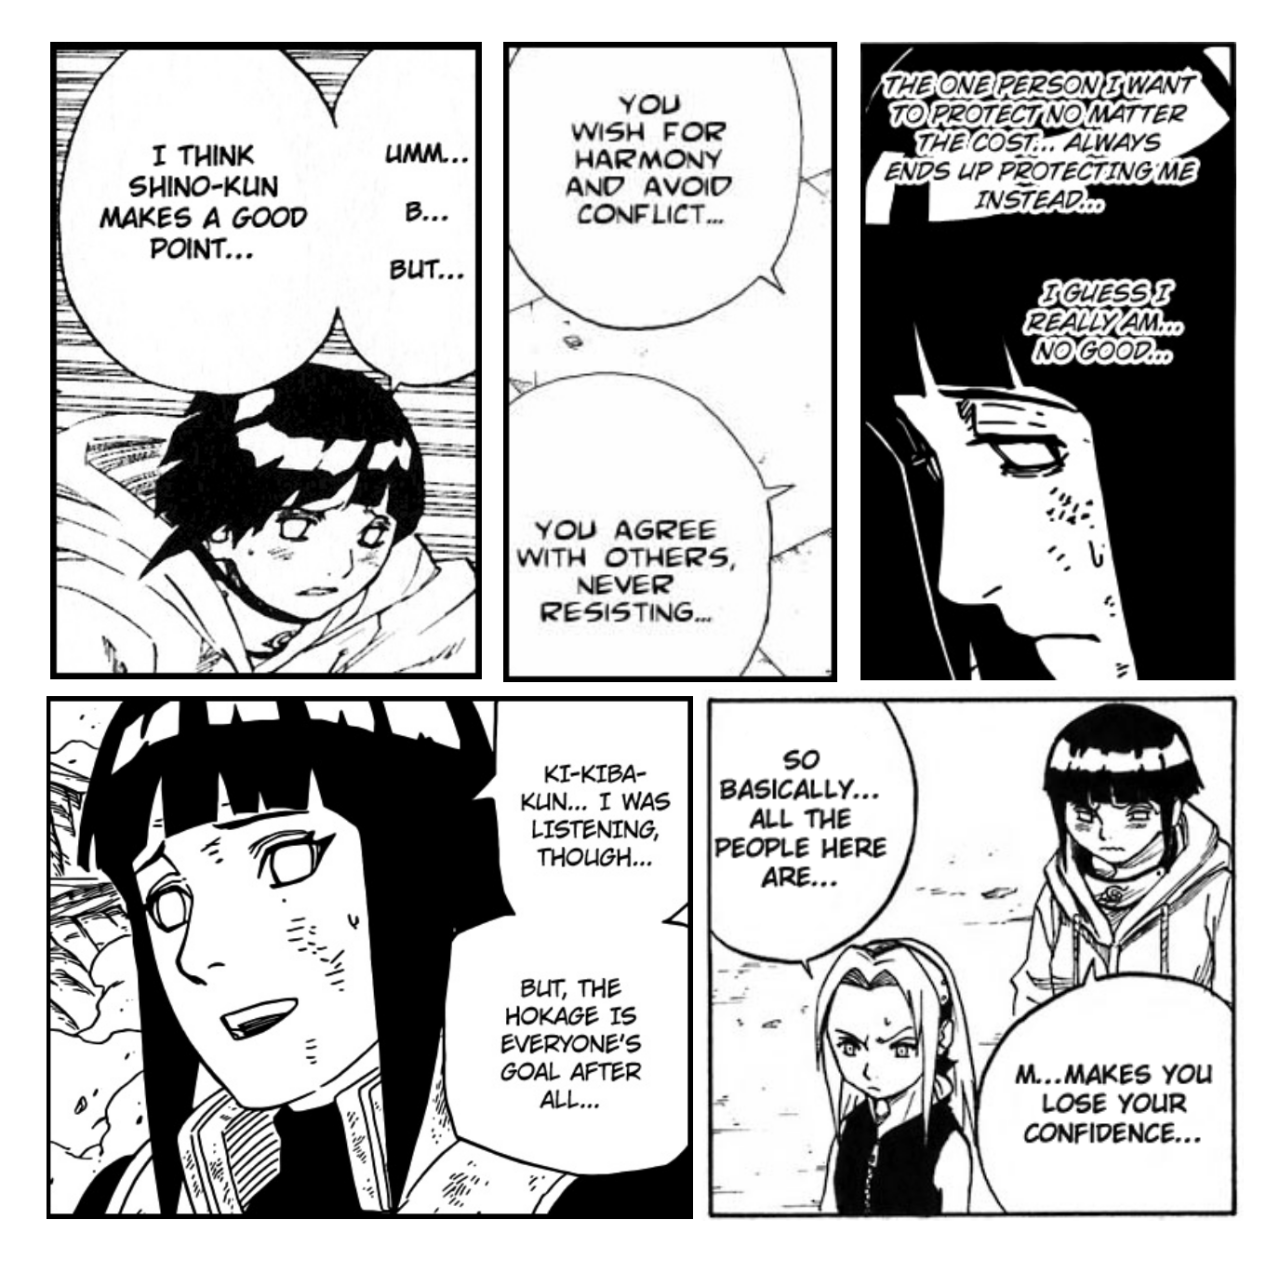 Why Naruto & Hinata Were Always Meant to End Up Together